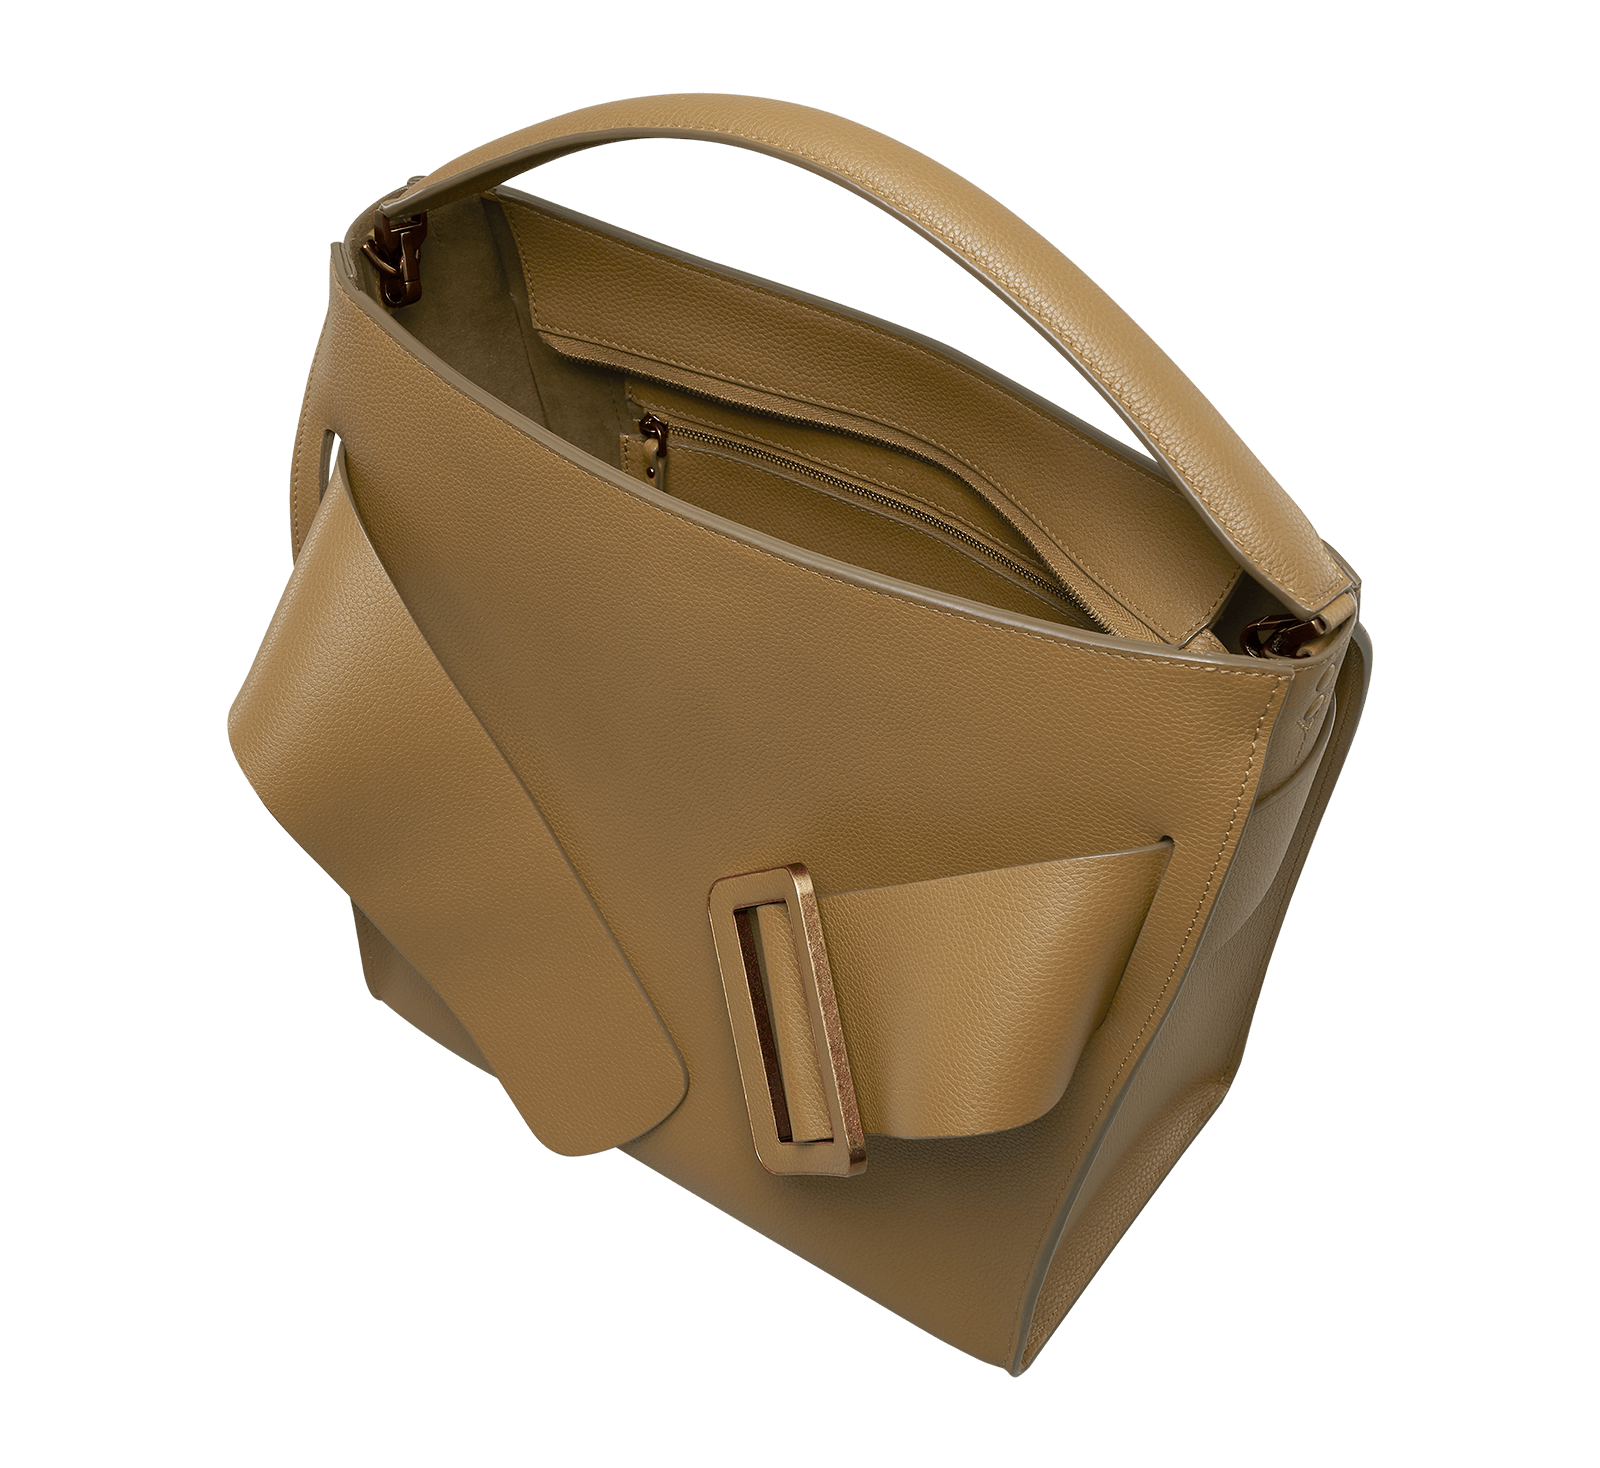 Open, soft brown natural grain leather handbag with a single carry handle, oversized front buckle detail and top zip fastener.